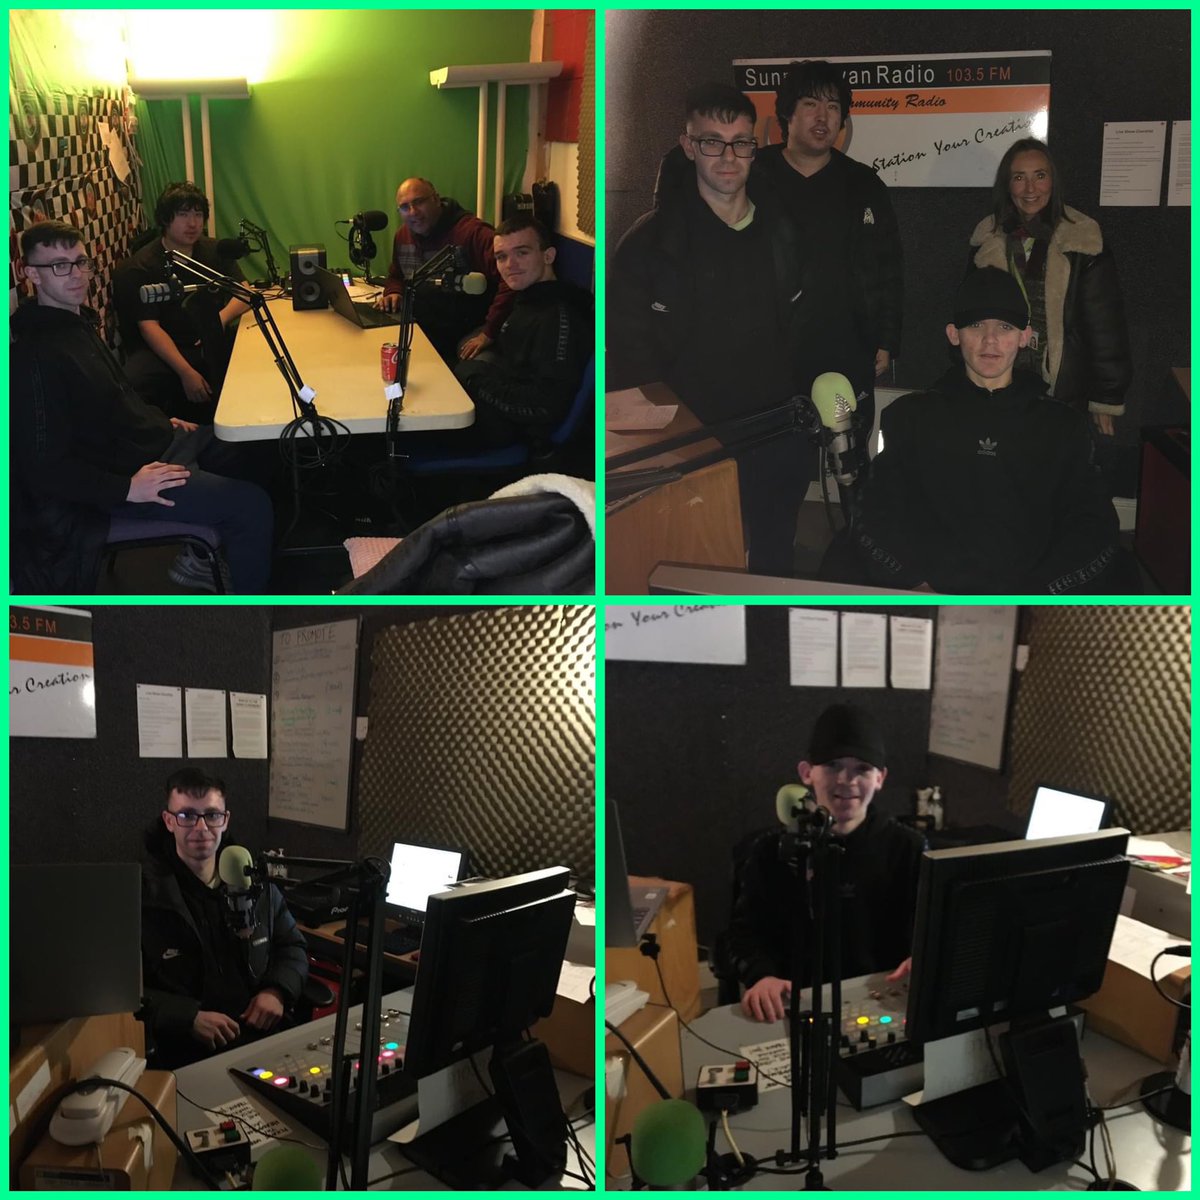 Our Creative and Digital Training for Work programme completed 2 sessions working with @SunnyGRadio completing  podcasting and radio training last Monday and Tuesday. The young people got the chance to create their own radio show and podcast! Well done to all 👏

#allinglasgow